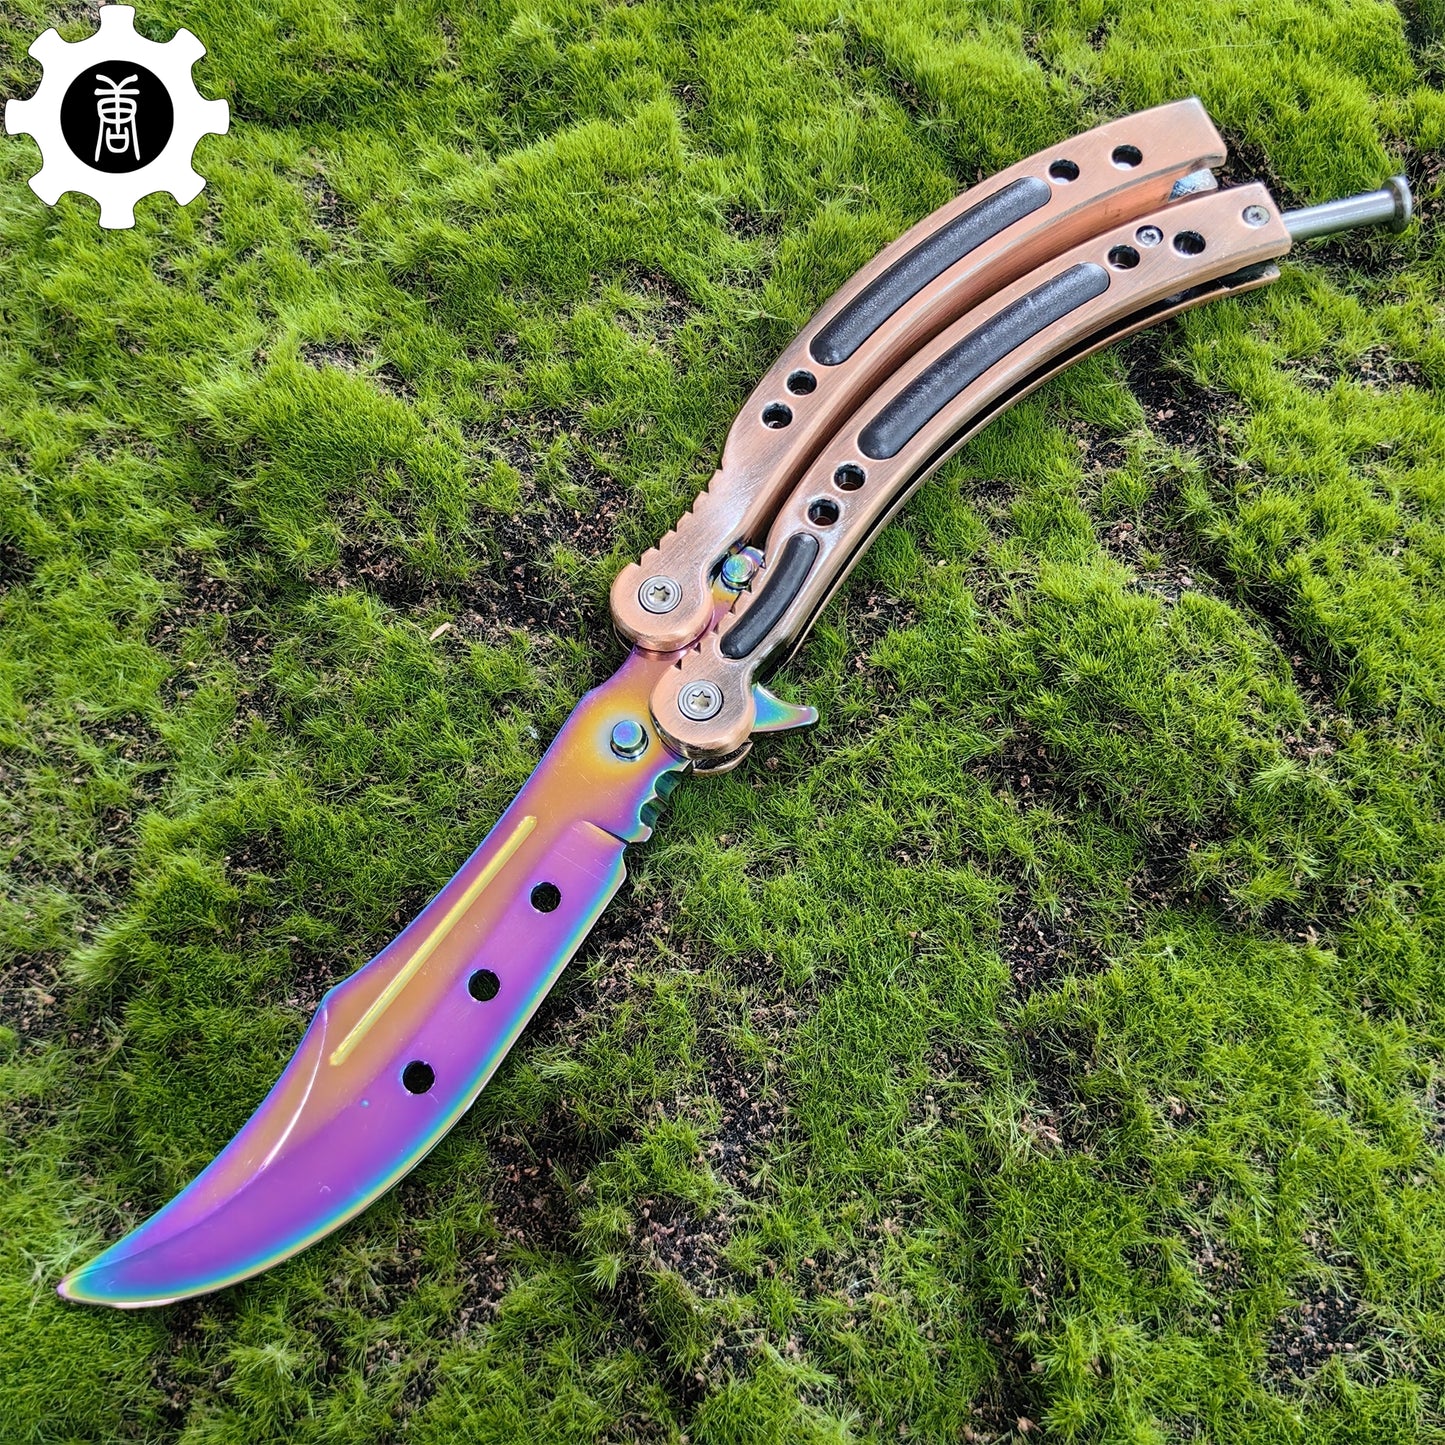 Fade Rainbow Butterfly Knife Metal Balisong Trainer